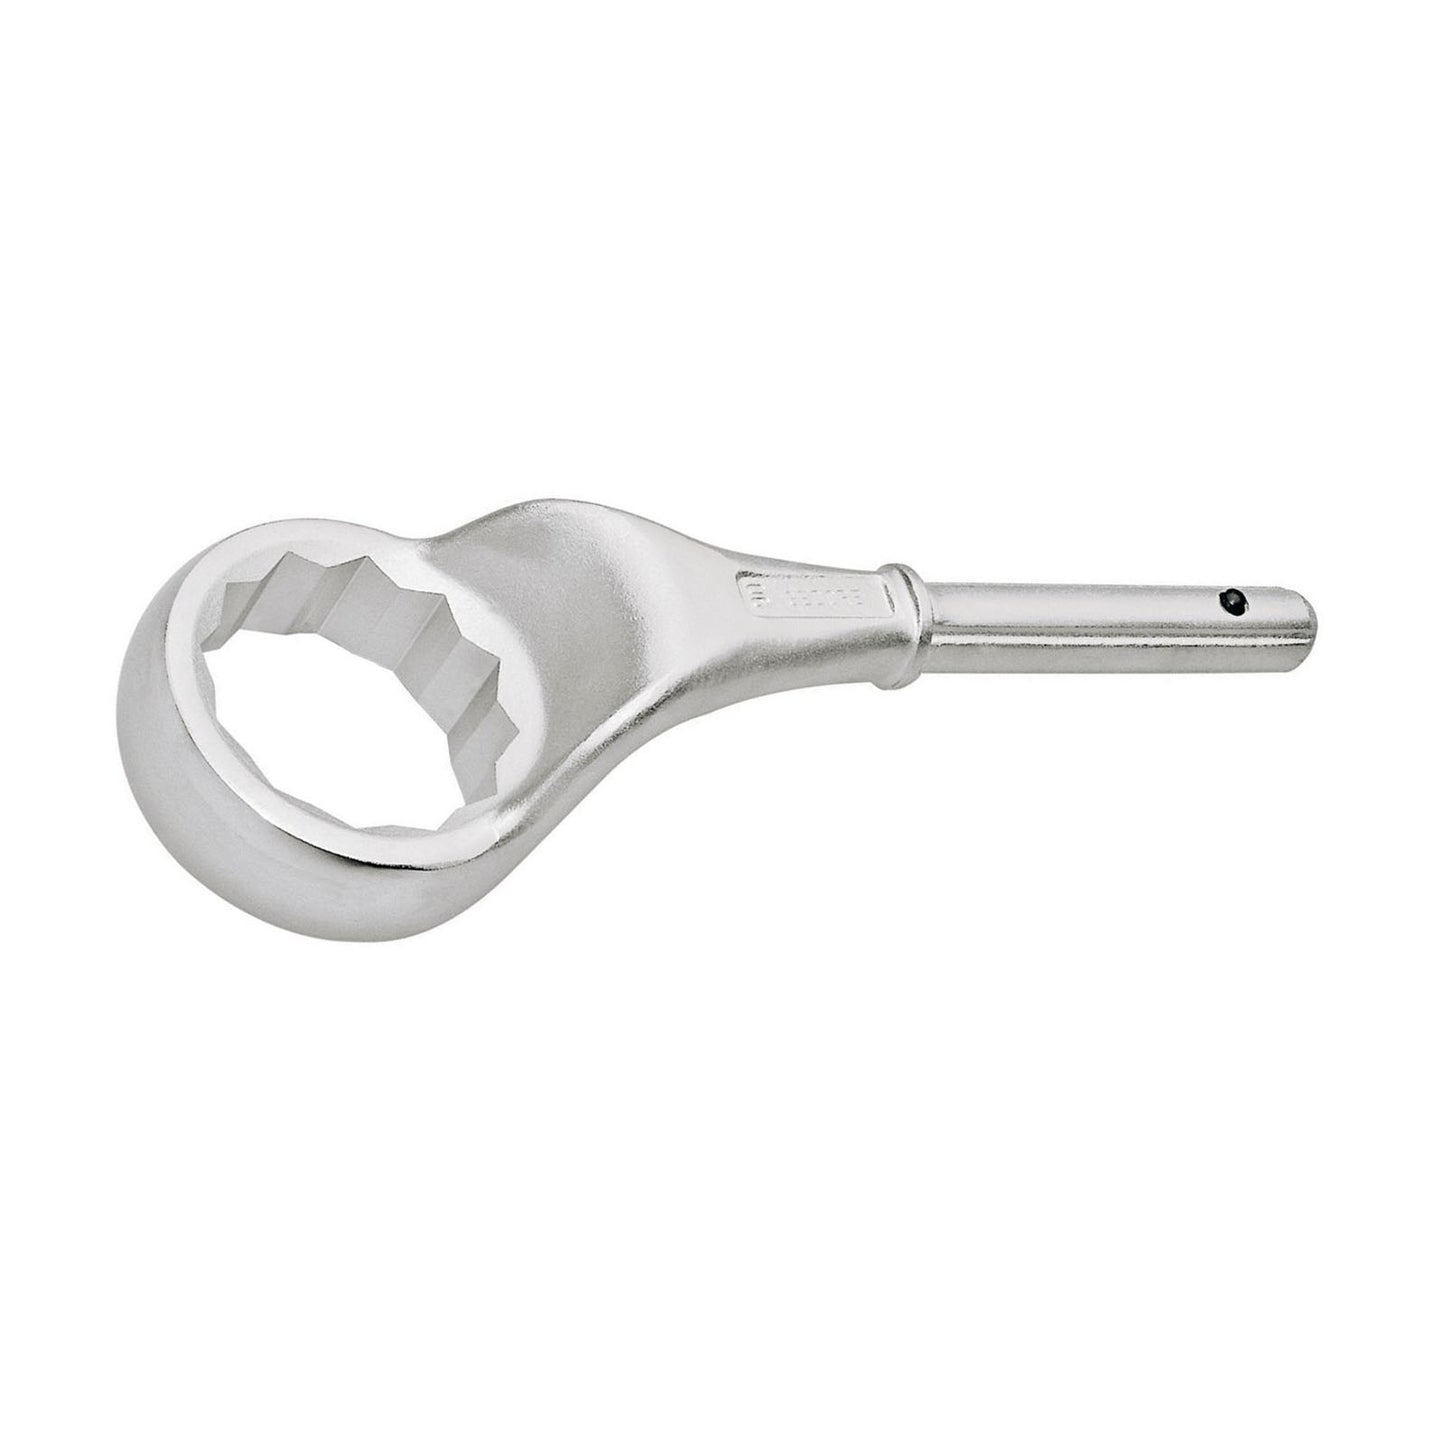 GEDORE 2 A 60 - Traction Wrench, 60mm (6034730)